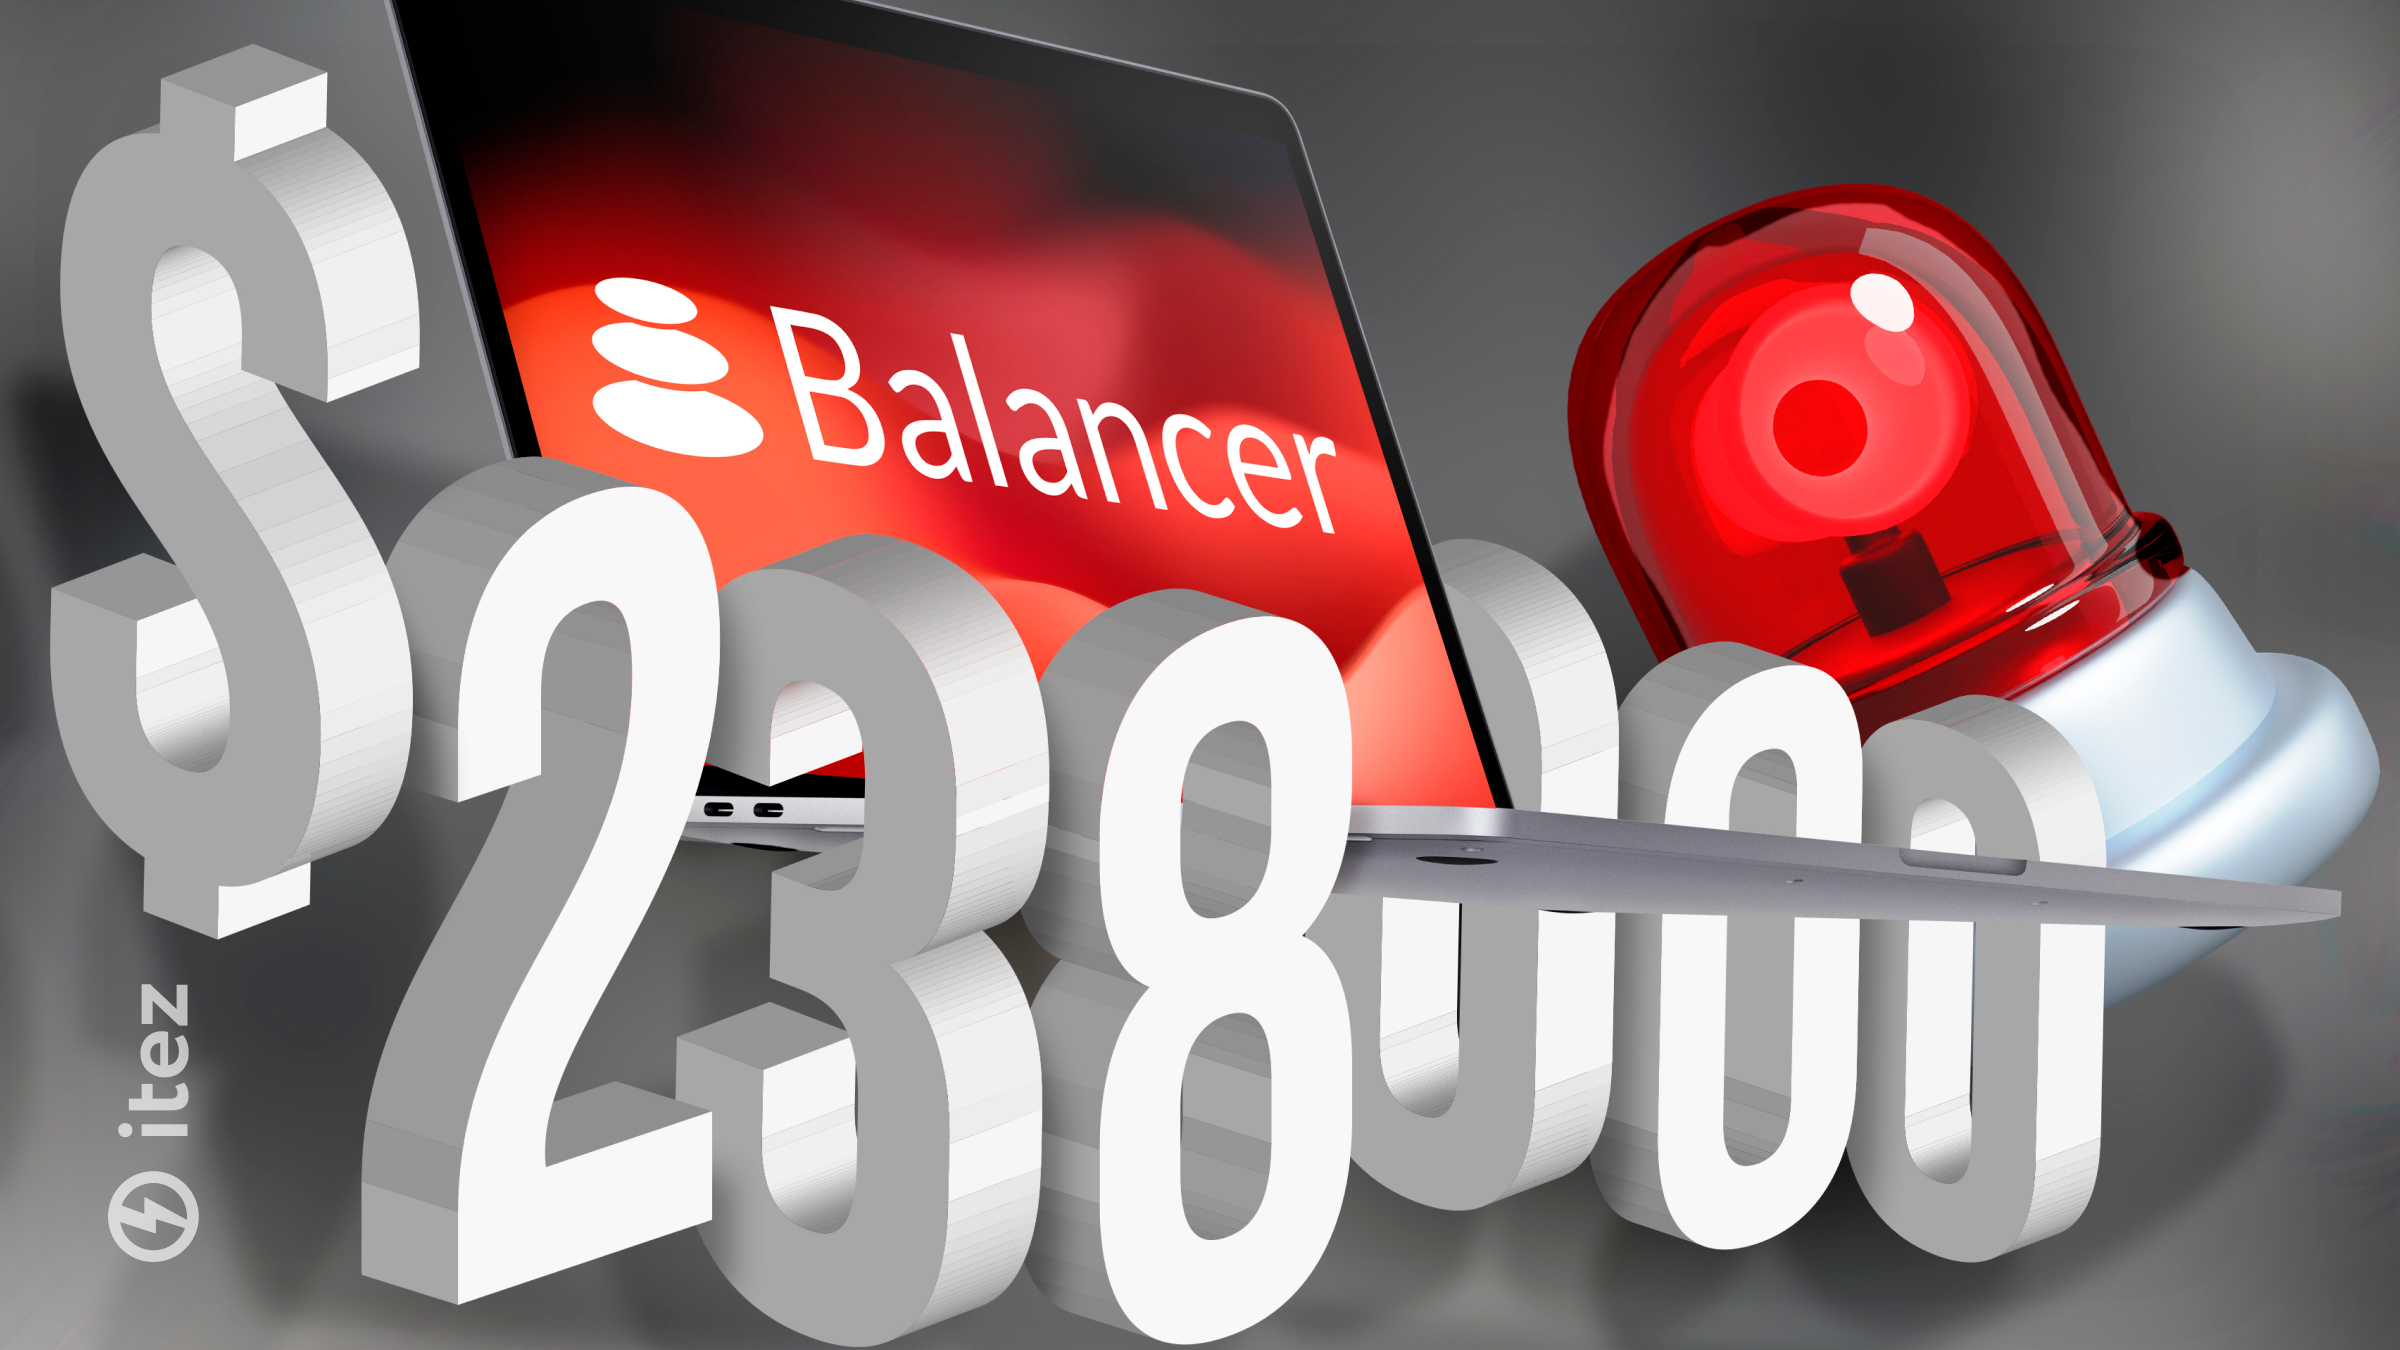 Balancer DEX website hacked with $238,000 in losses